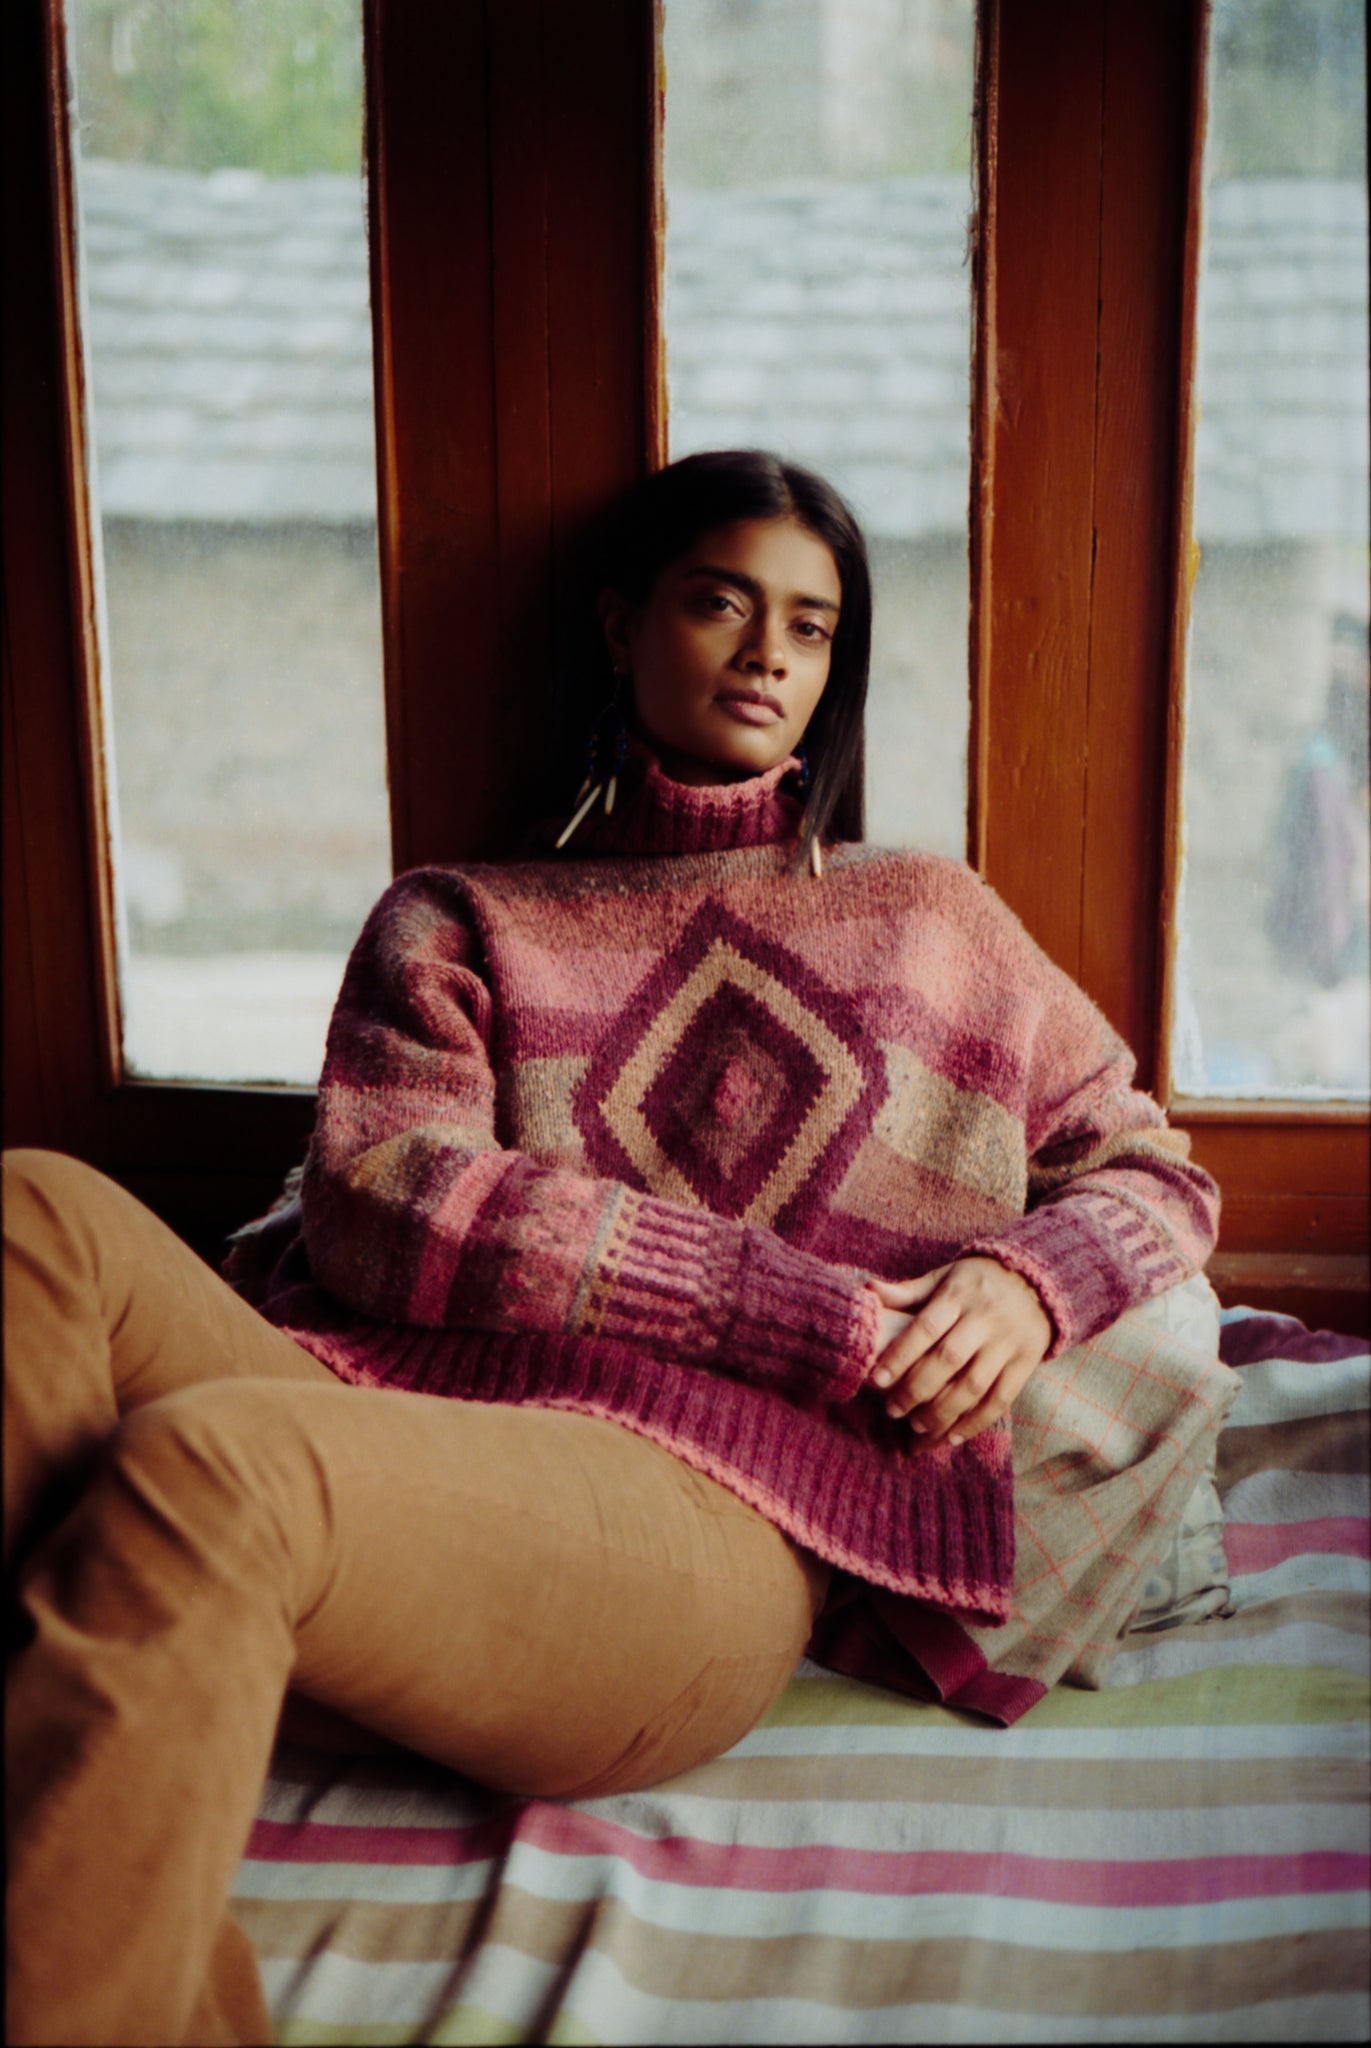 WOOL JUMPER | Forest berry